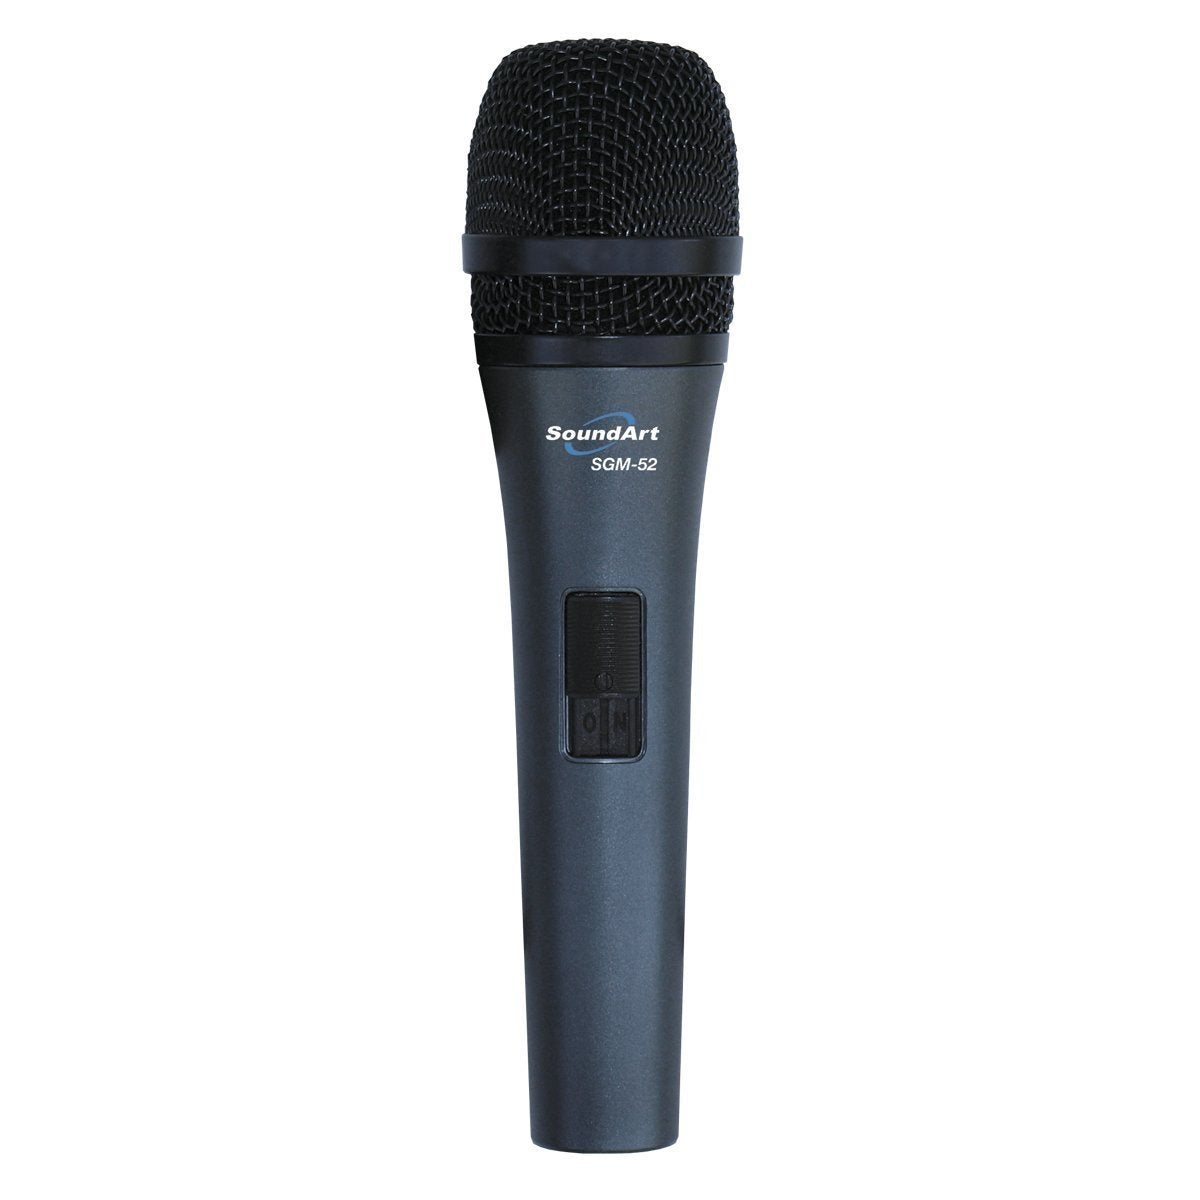 SoundArt SGM-52 Hand-Held Dynamic Microphone with Protective Bag